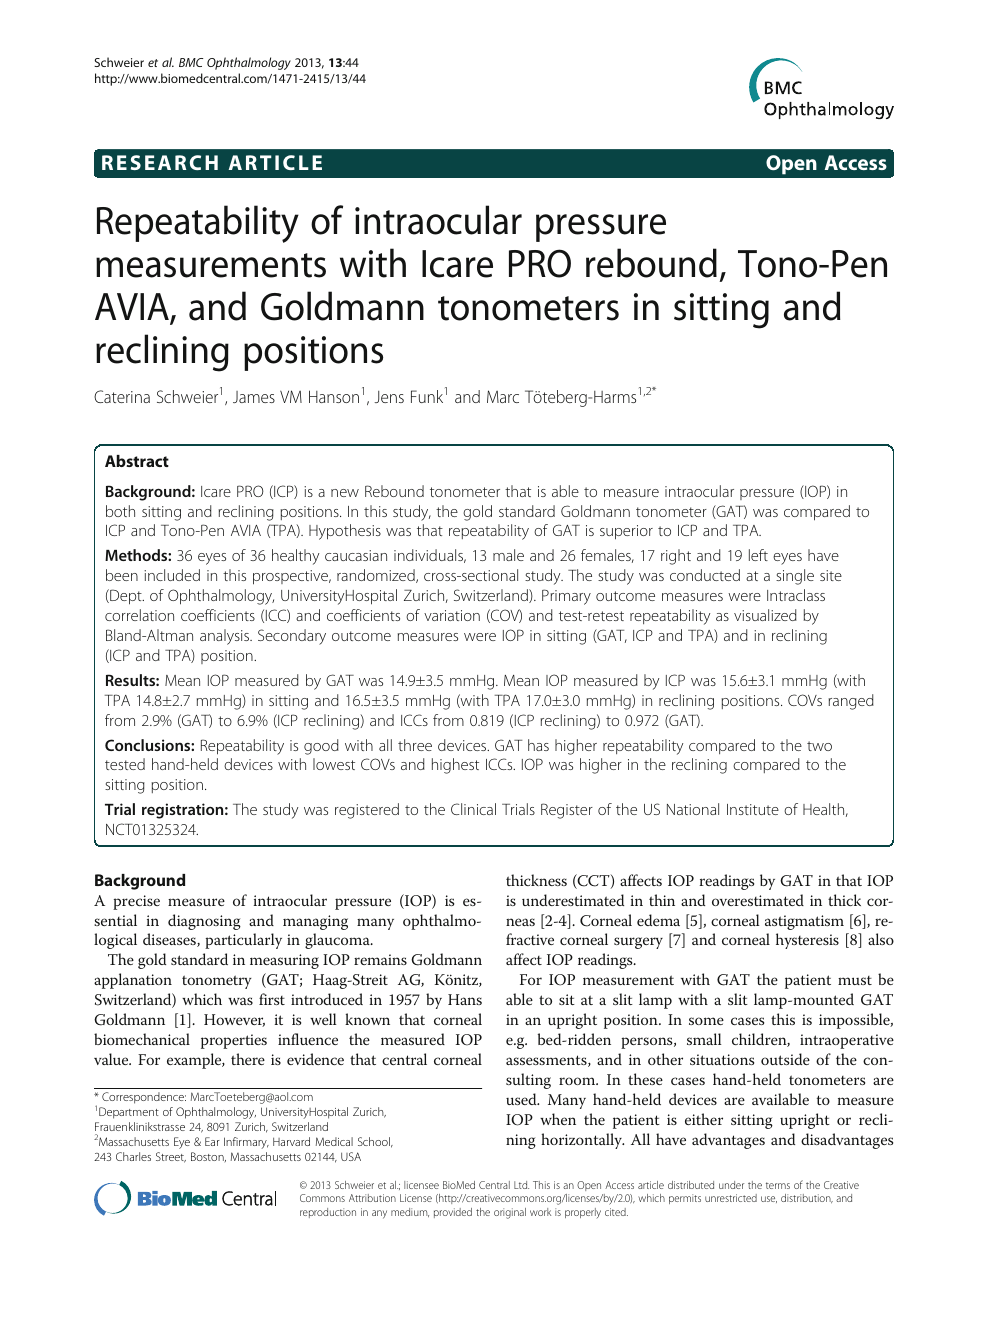 Repeatability Of Intraocular Pressure Measurements With Icare Pro Rebound Tono Pen Avia And Goldmann Tonometers In Sitting And Reclining Positions Topic Of Research Paper In Clinical Medicine Download Scholarly Article Pdf And